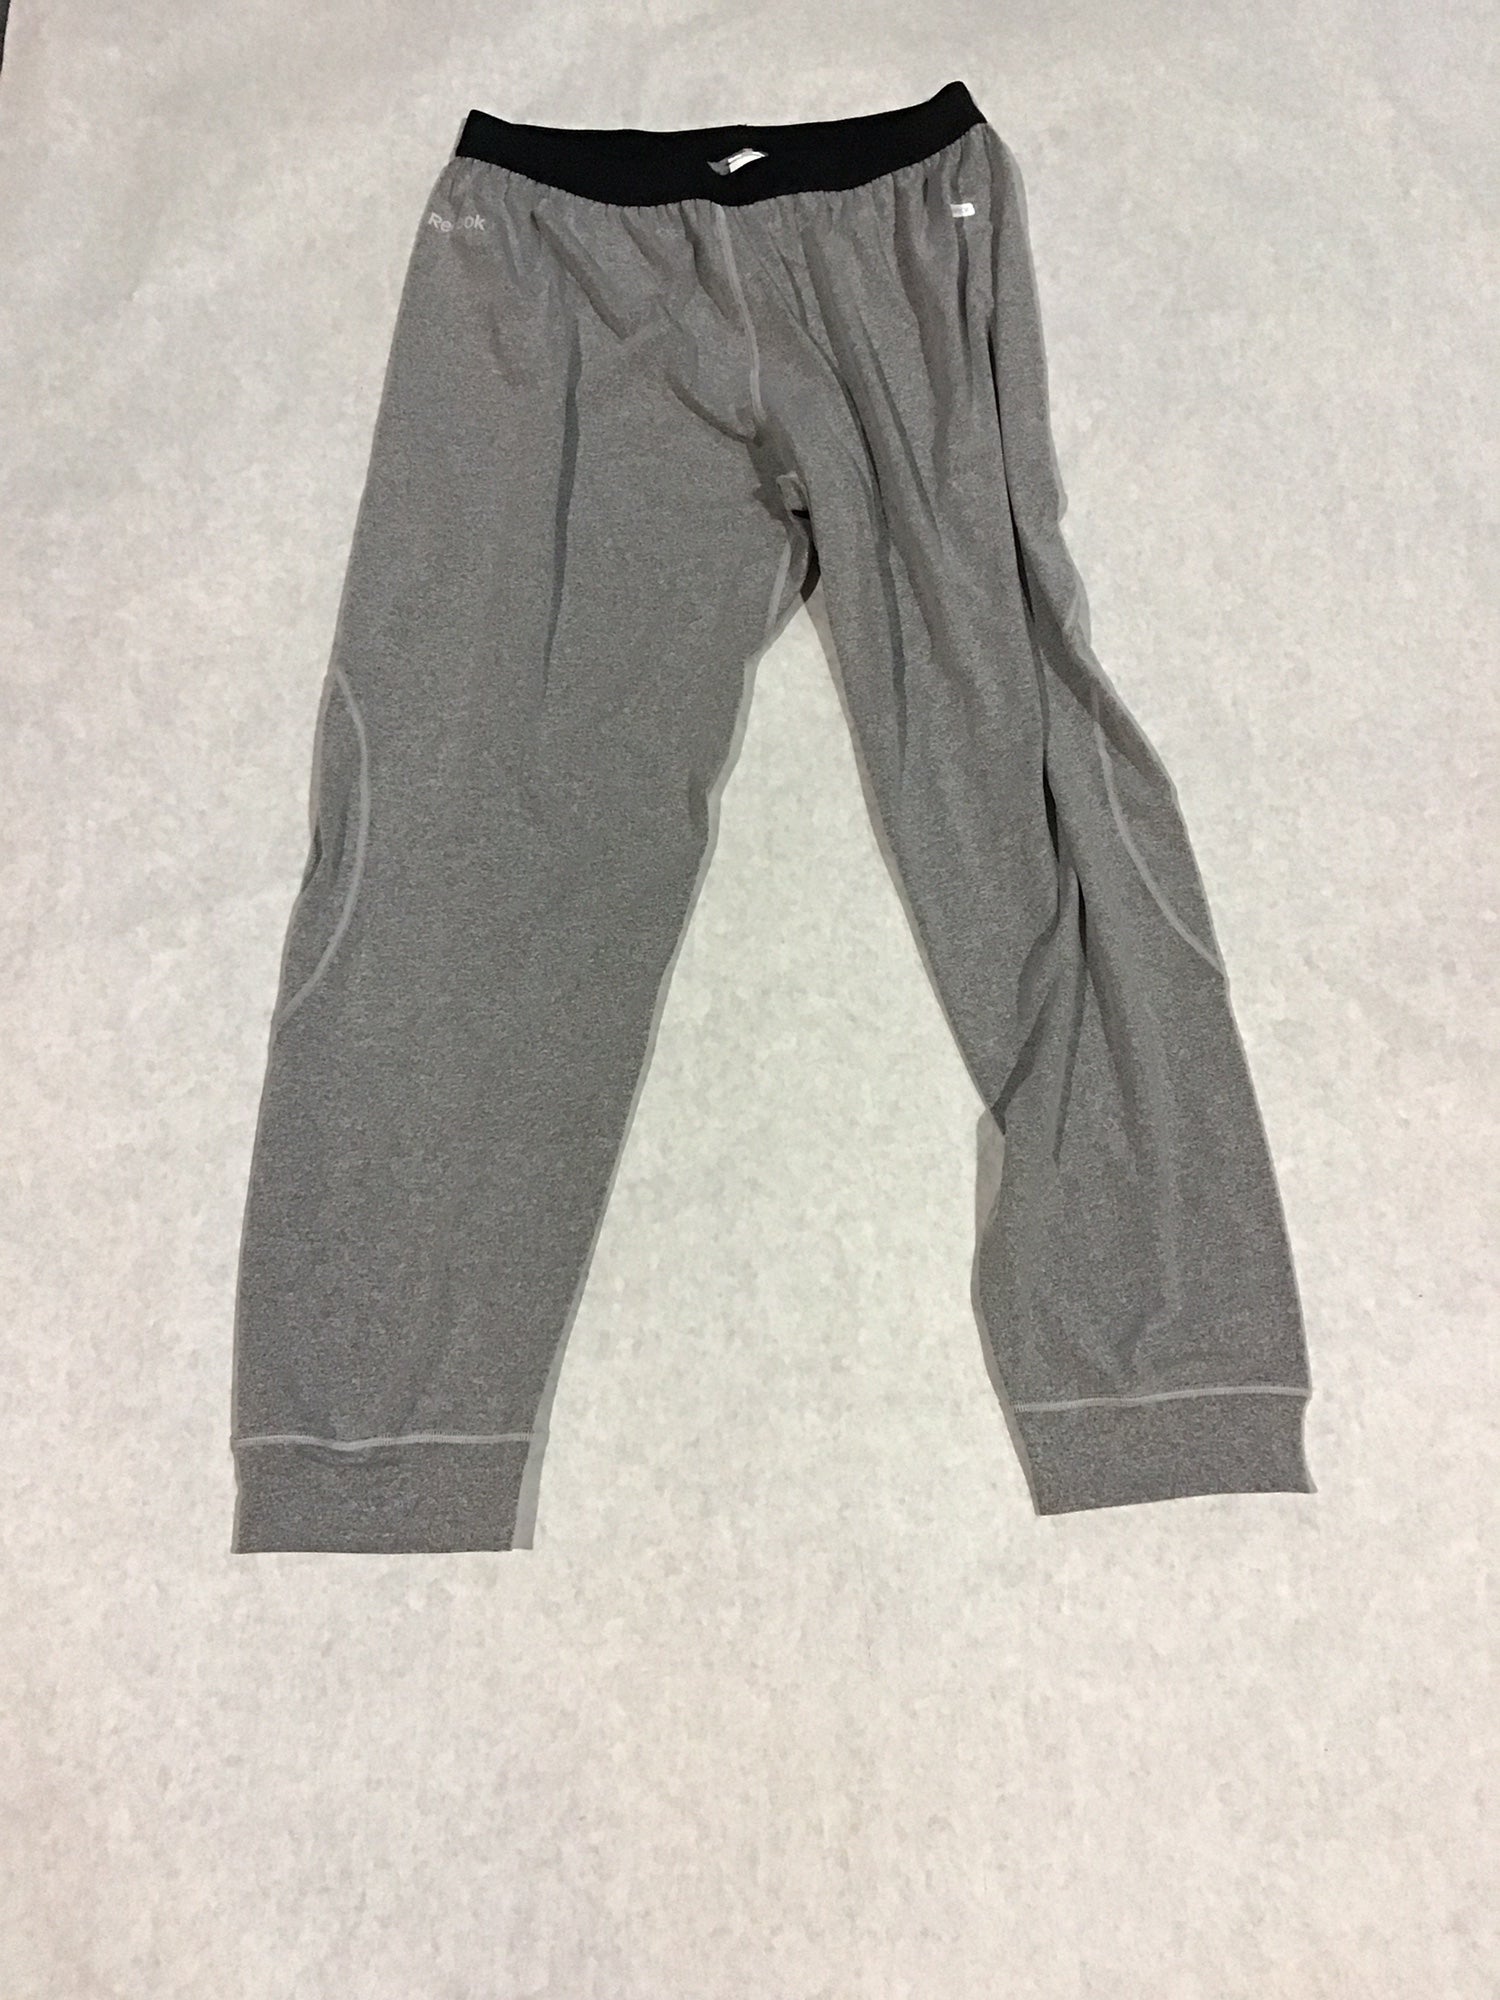 New in Box! S Details about   Hot Chillys Kids Girls MTF Base Layer Bottoms Pants Daisy 